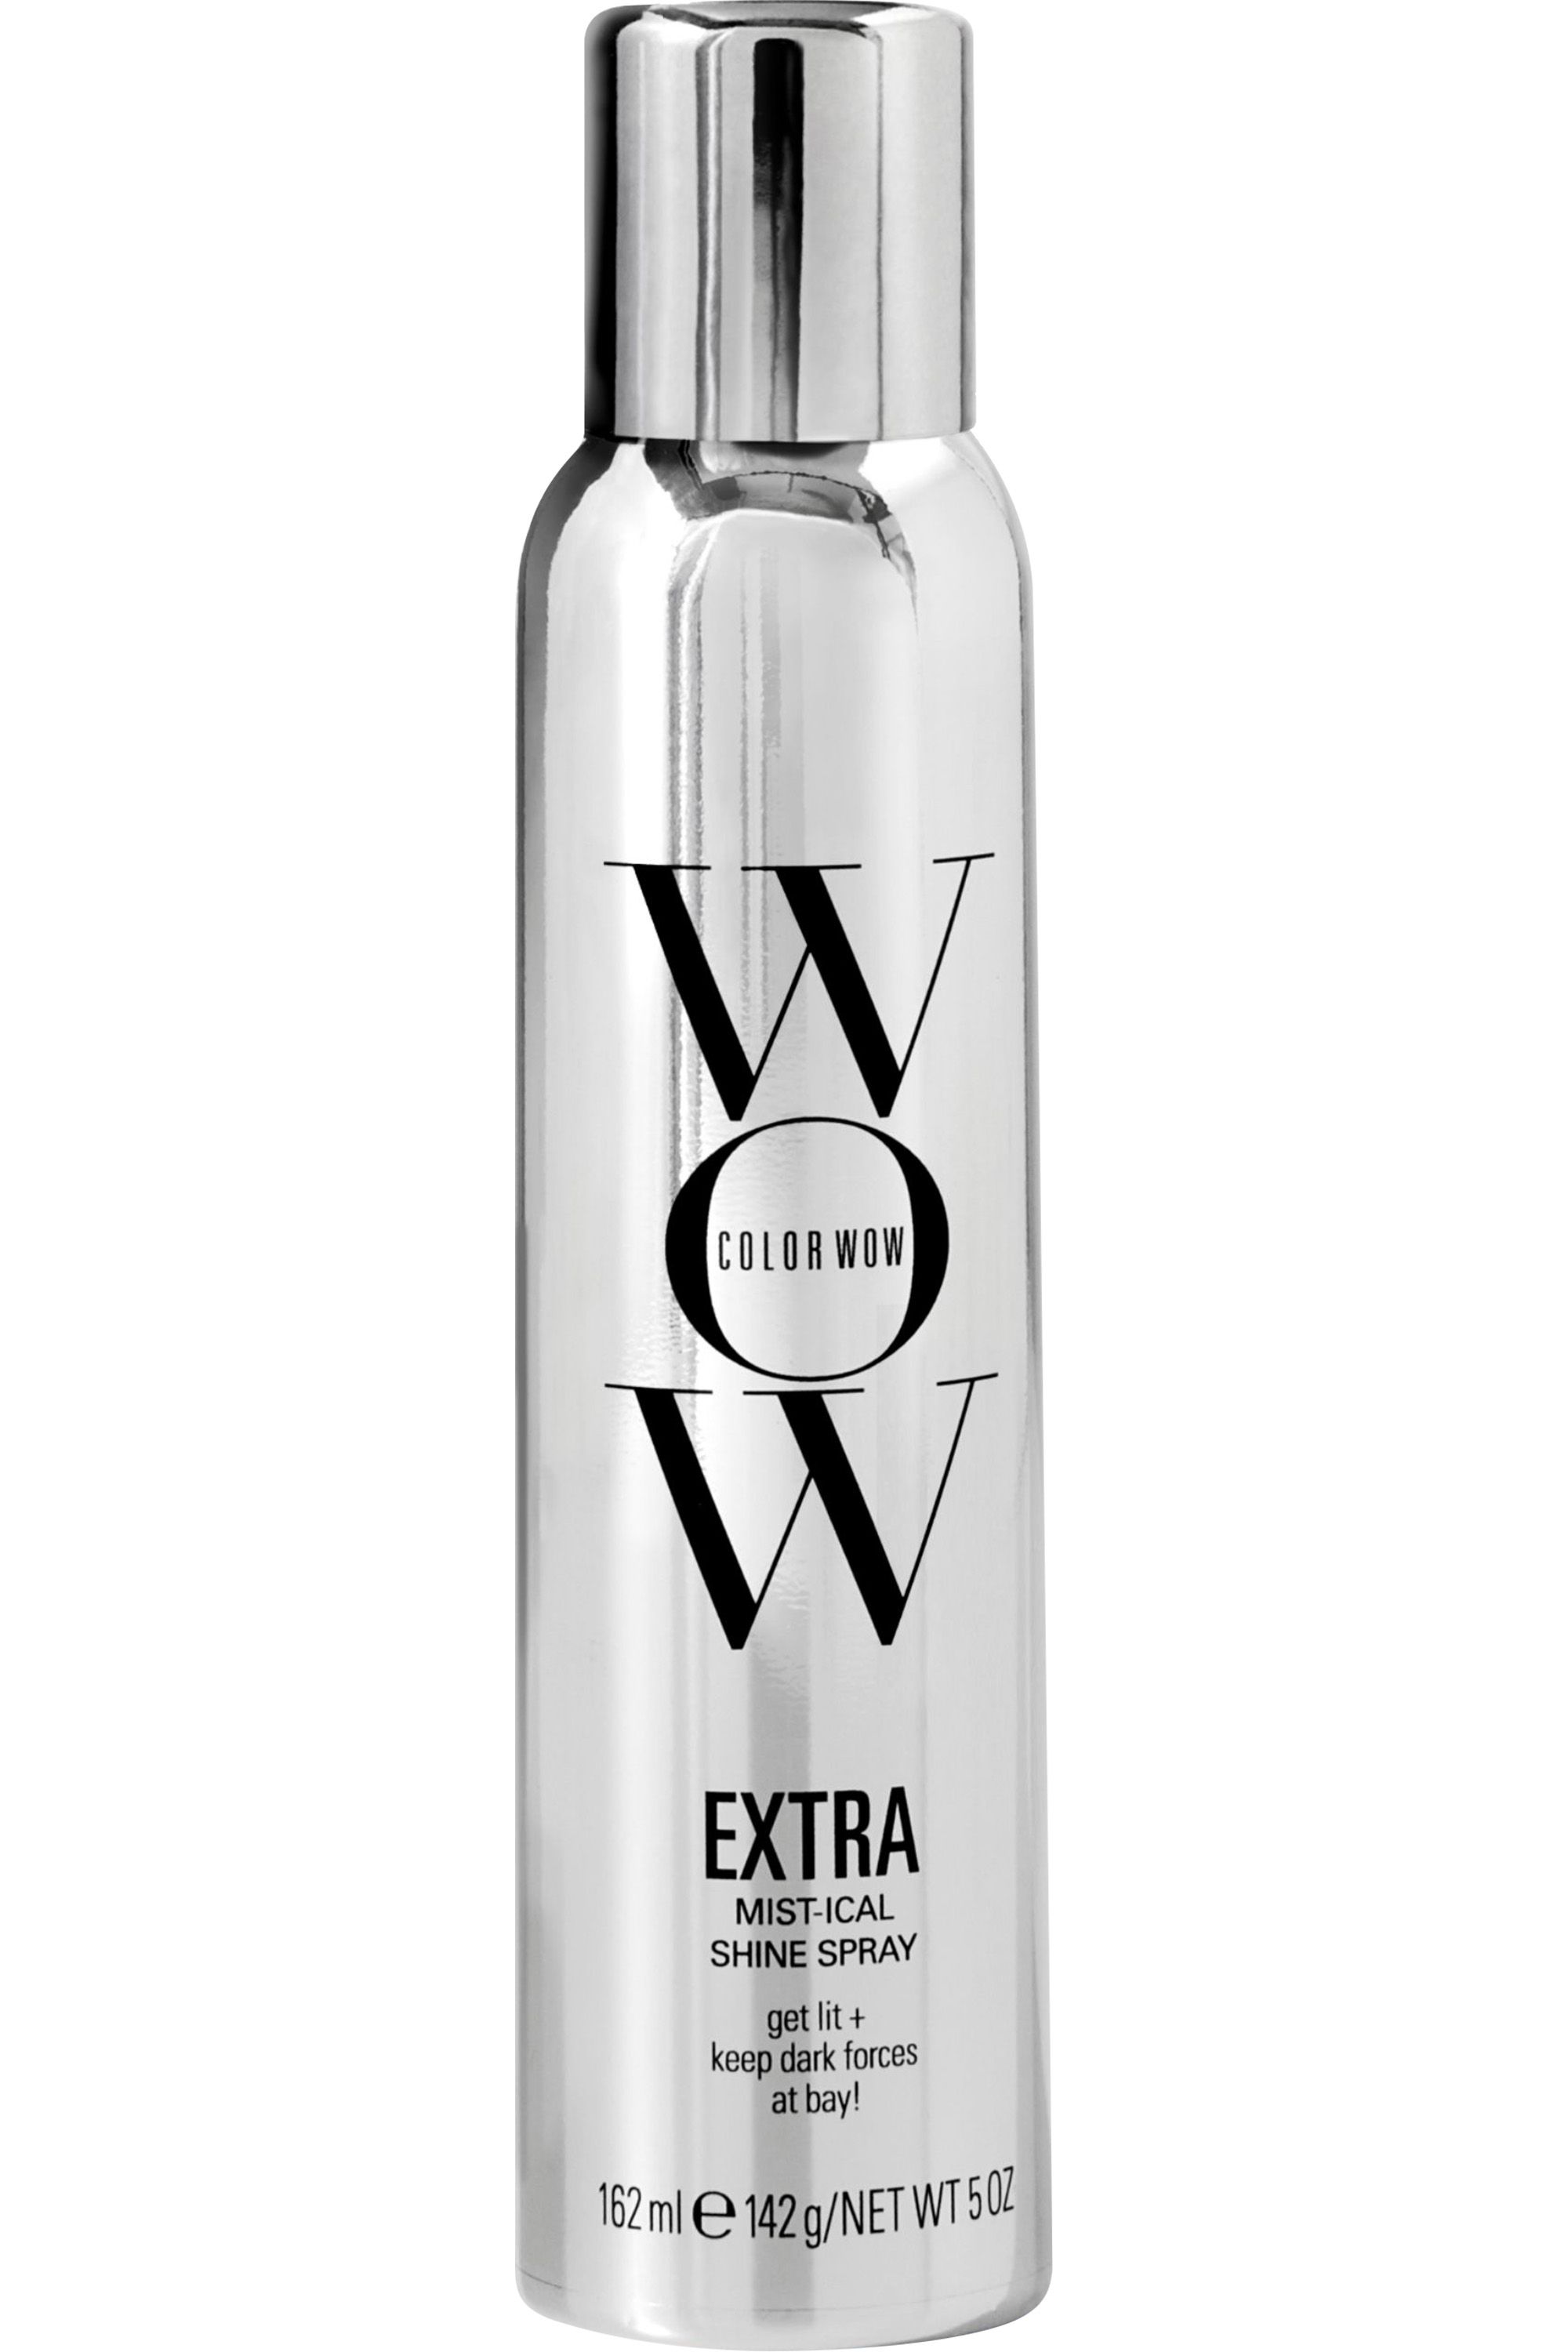 COLOR WOW - Spray brillance & protection thermique Extra - Blissim